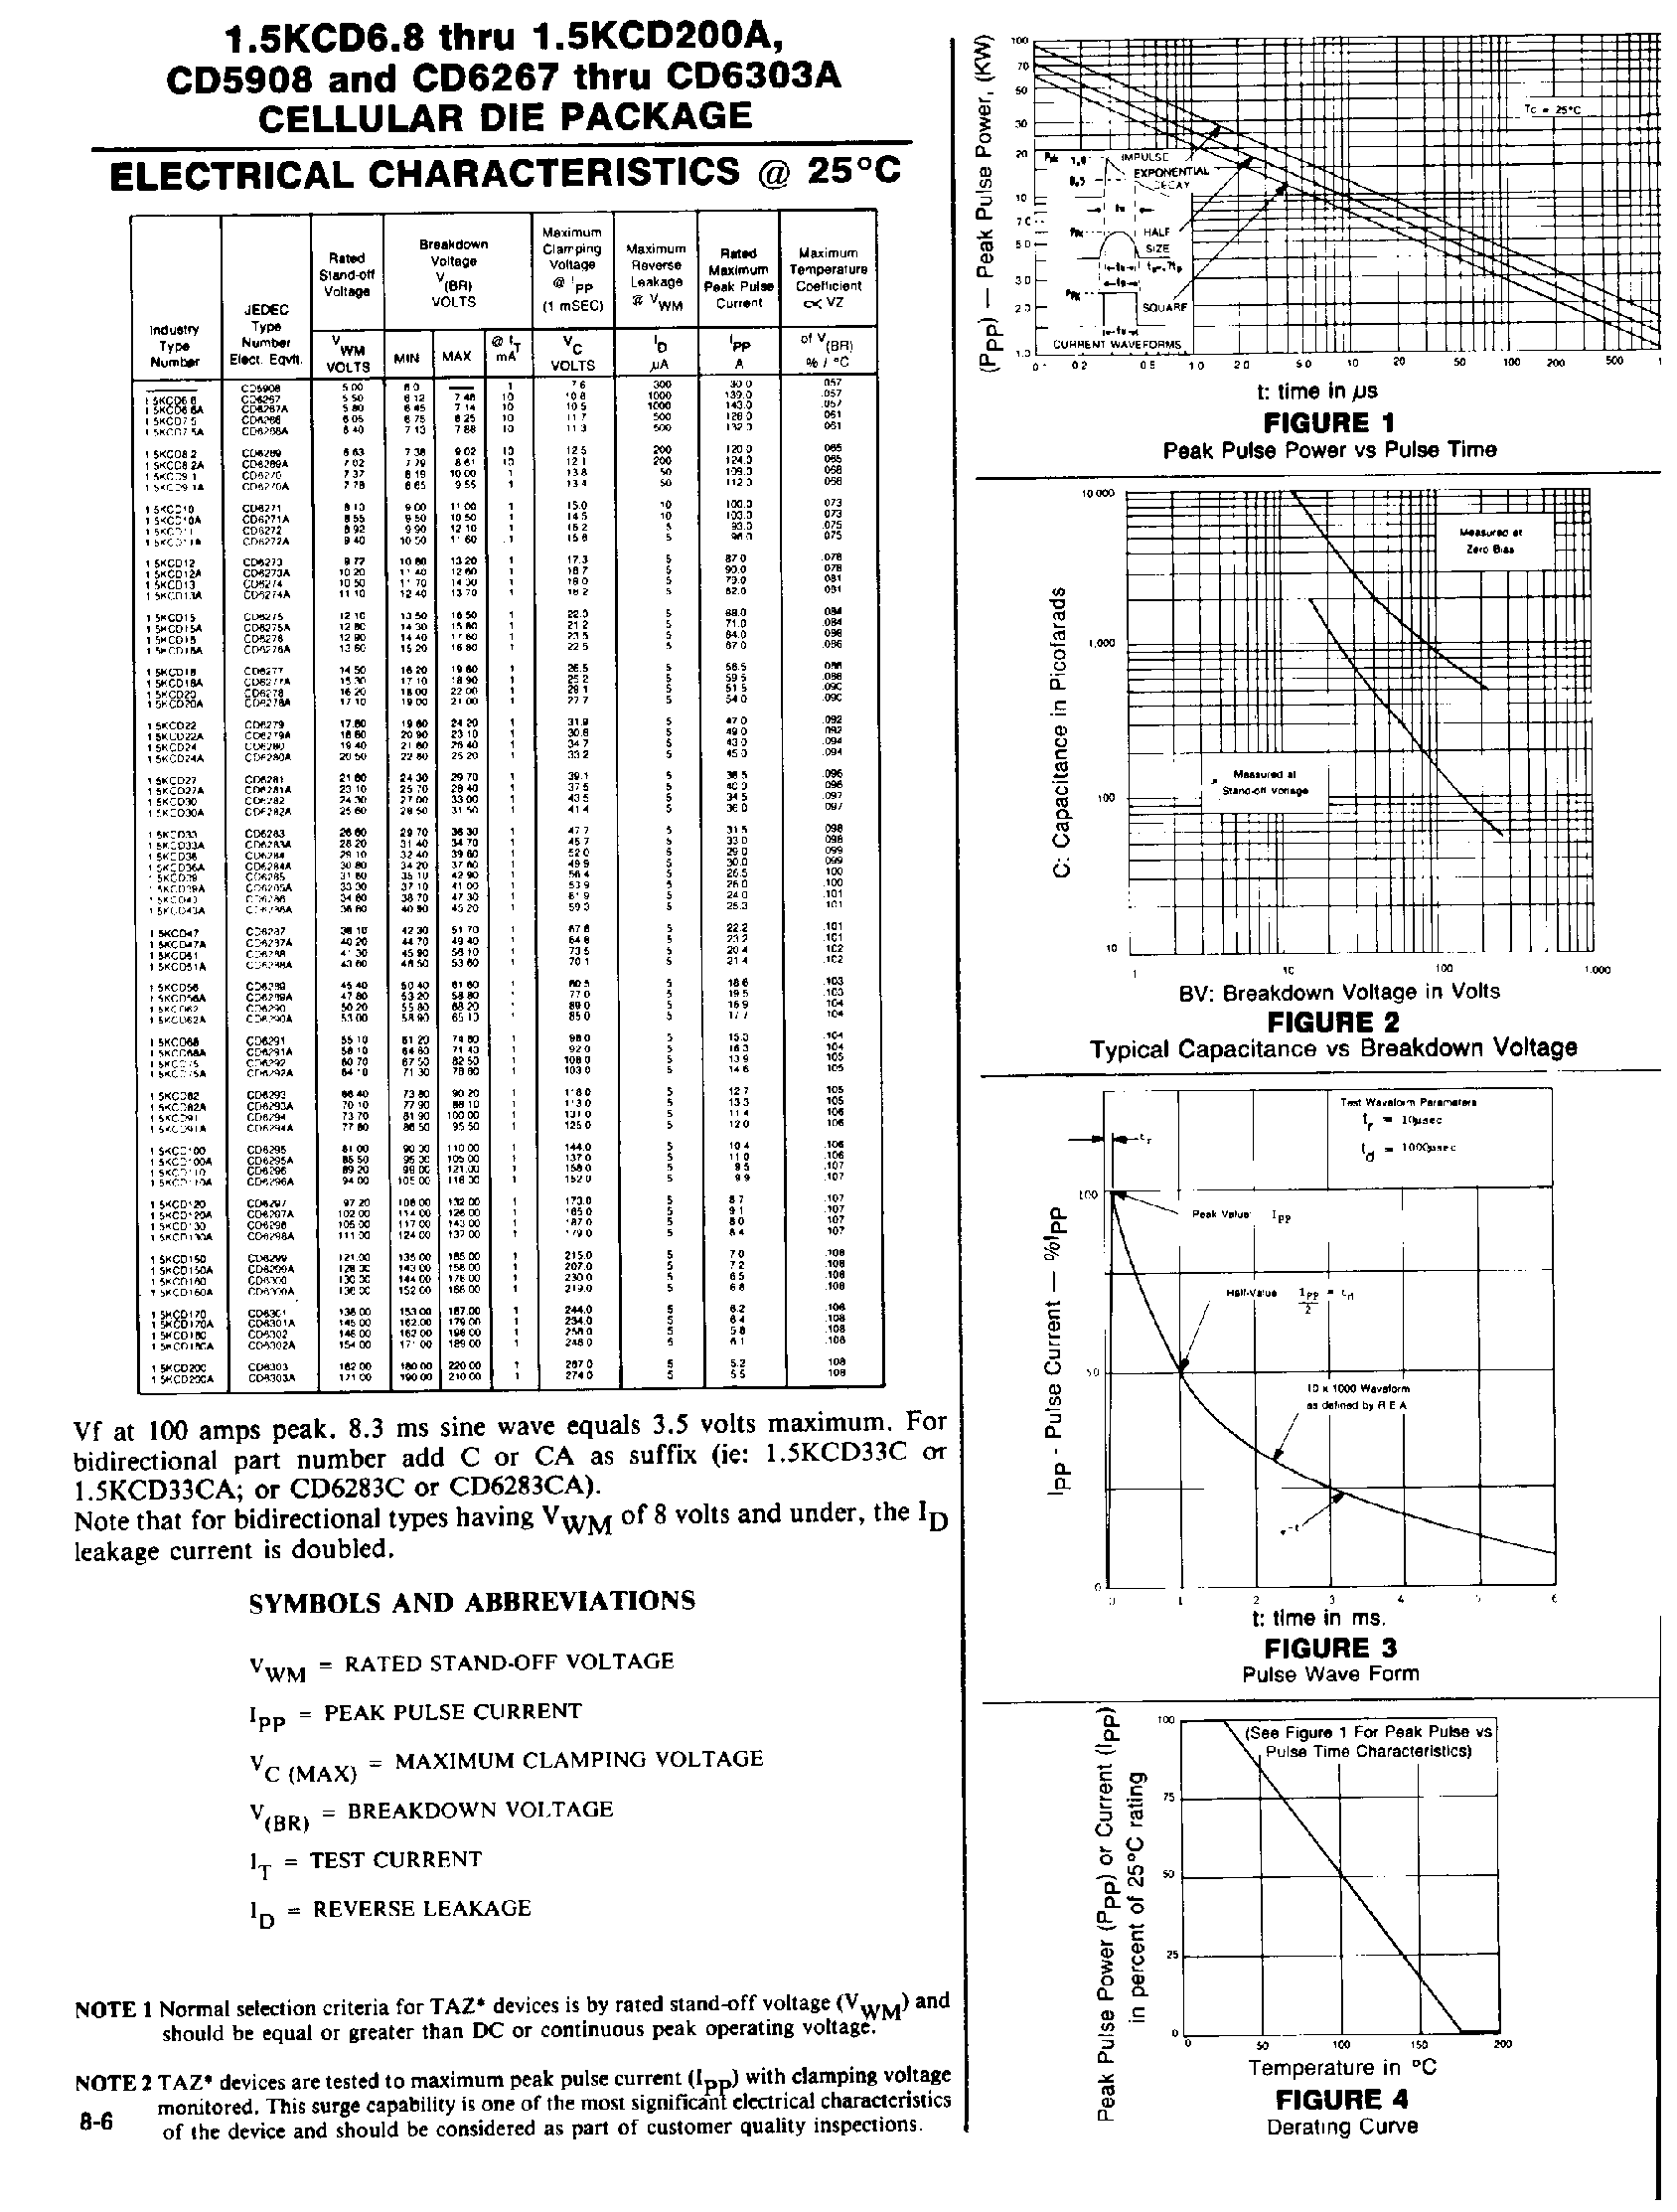 Datasheet CD6288A - Transient suppressor CELLULAR DIE PACKAGE page 2